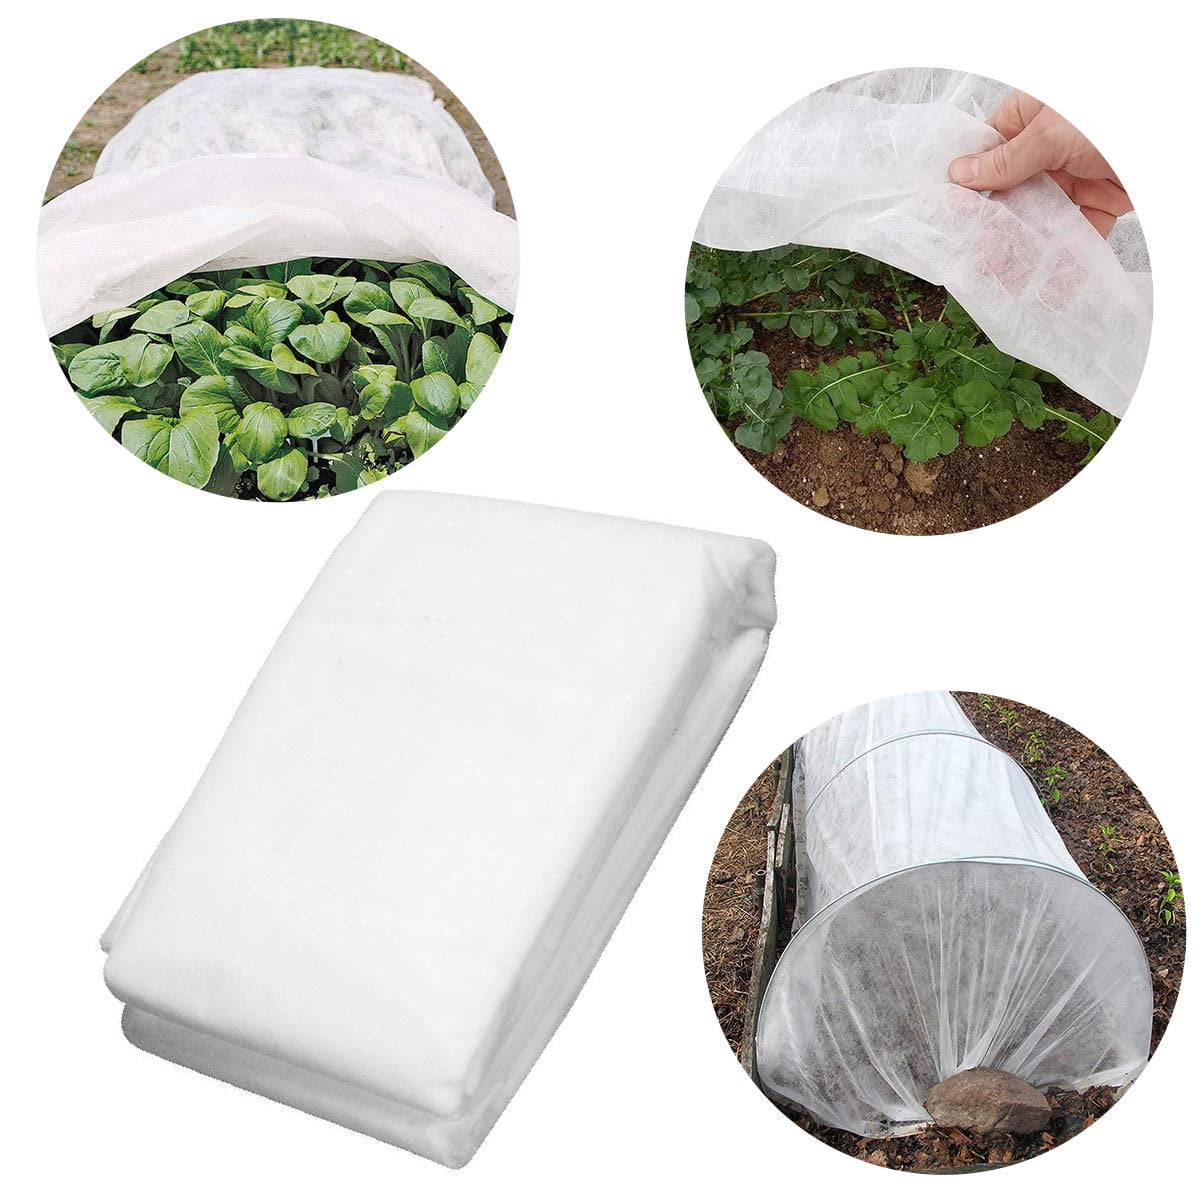 Agfabric Warm Worth Heavy Floating Row Cover & Plant Blanket 0.9oz Fabric of 5x15ft for Frost Protection Harsh Weather Resistance& Seed Germination